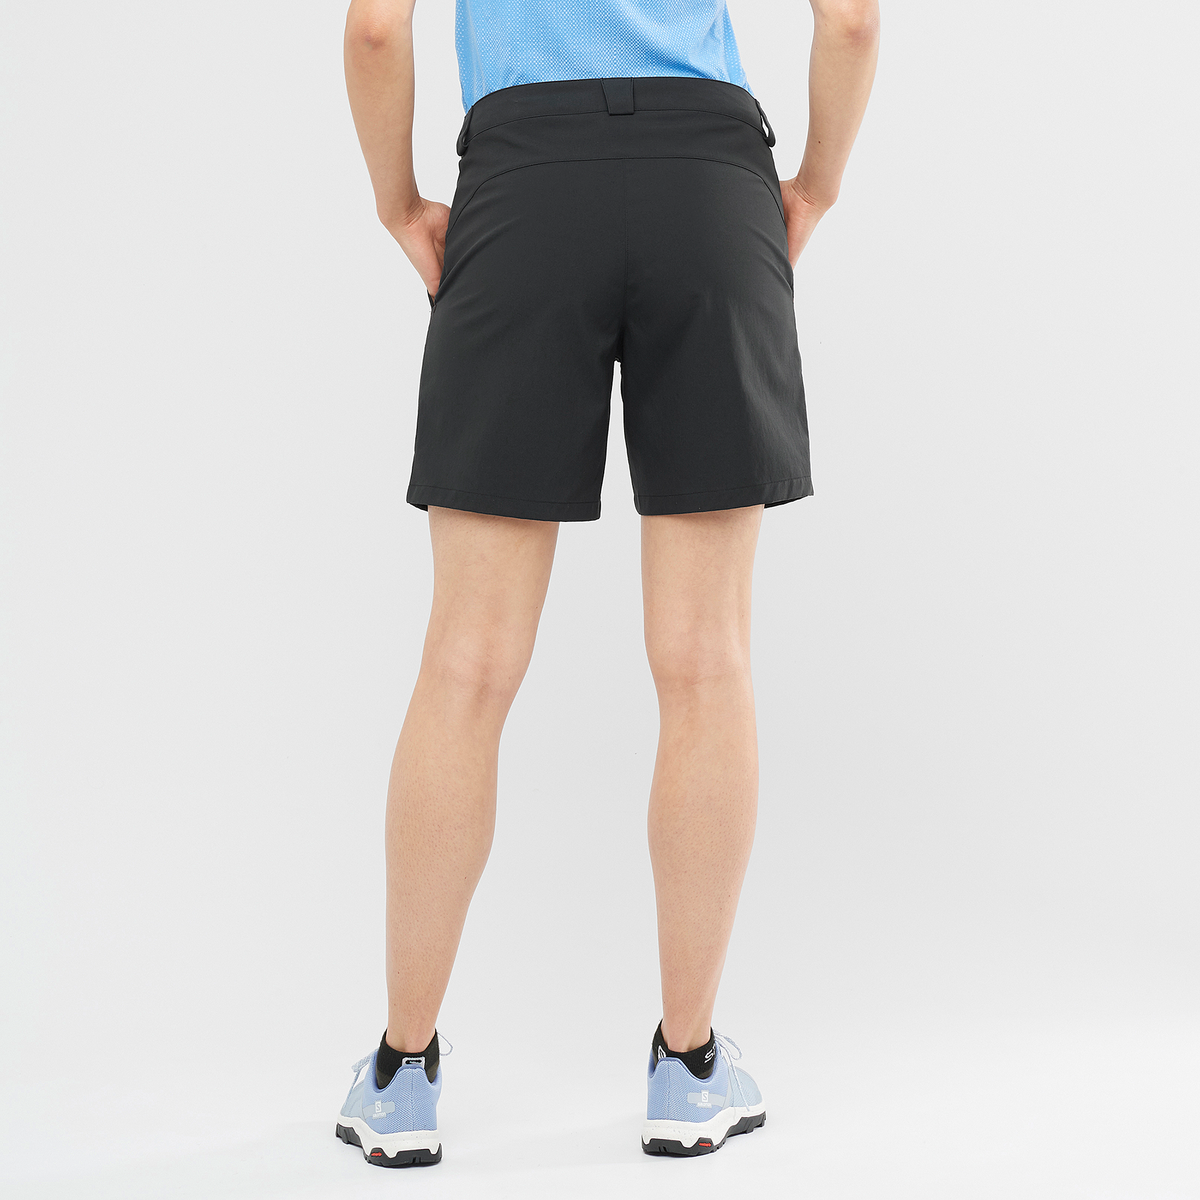 OUTRACK SHORTS